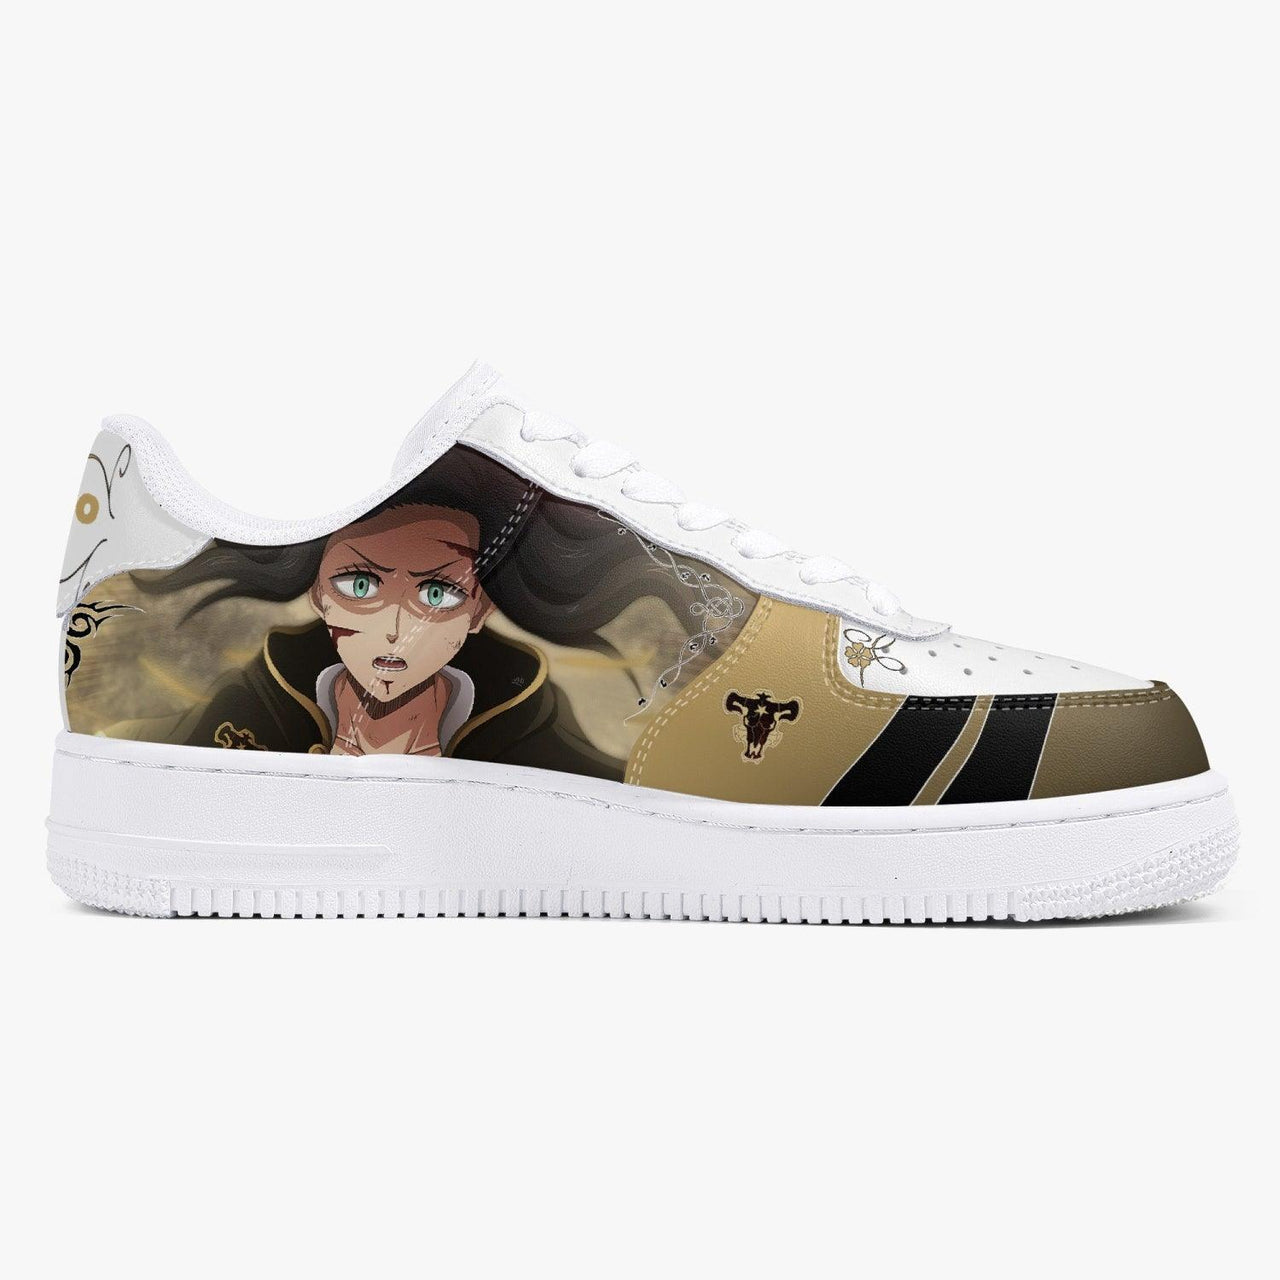 Black Clover Charmy Pappitson AF1 Anime Shoes _ Black Clover _ Ayuko